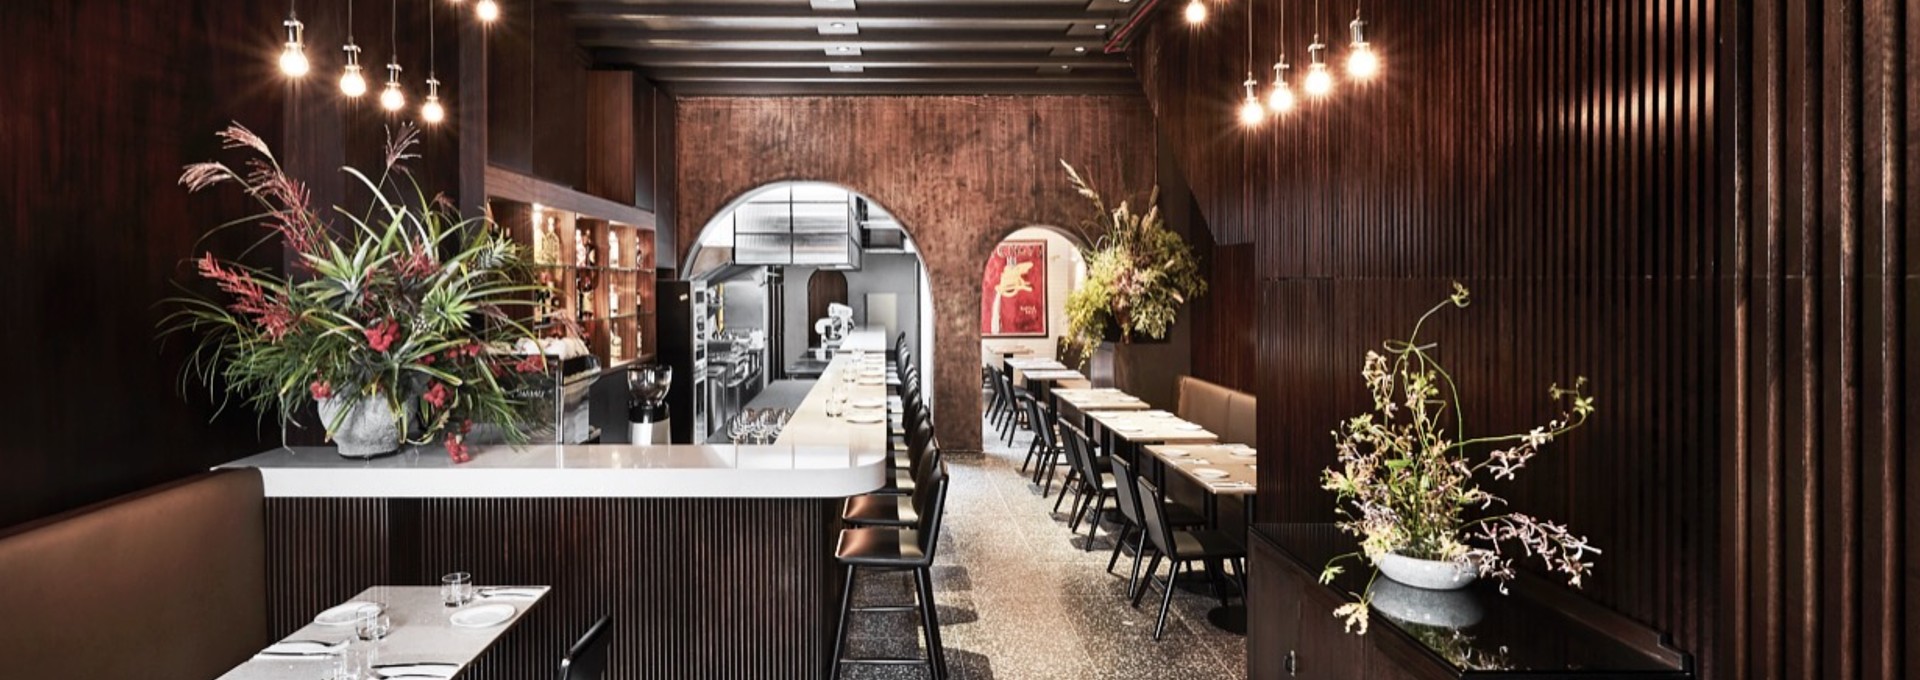 Experience the Essence of Venetian Design and Hospitality at Bar Cicheti, Singapore, design by Studio Königshausen. This Singaporean gem features a minimalist interior adorned with classic bistro elements, paying homage to Venetian Gothic architecture. 